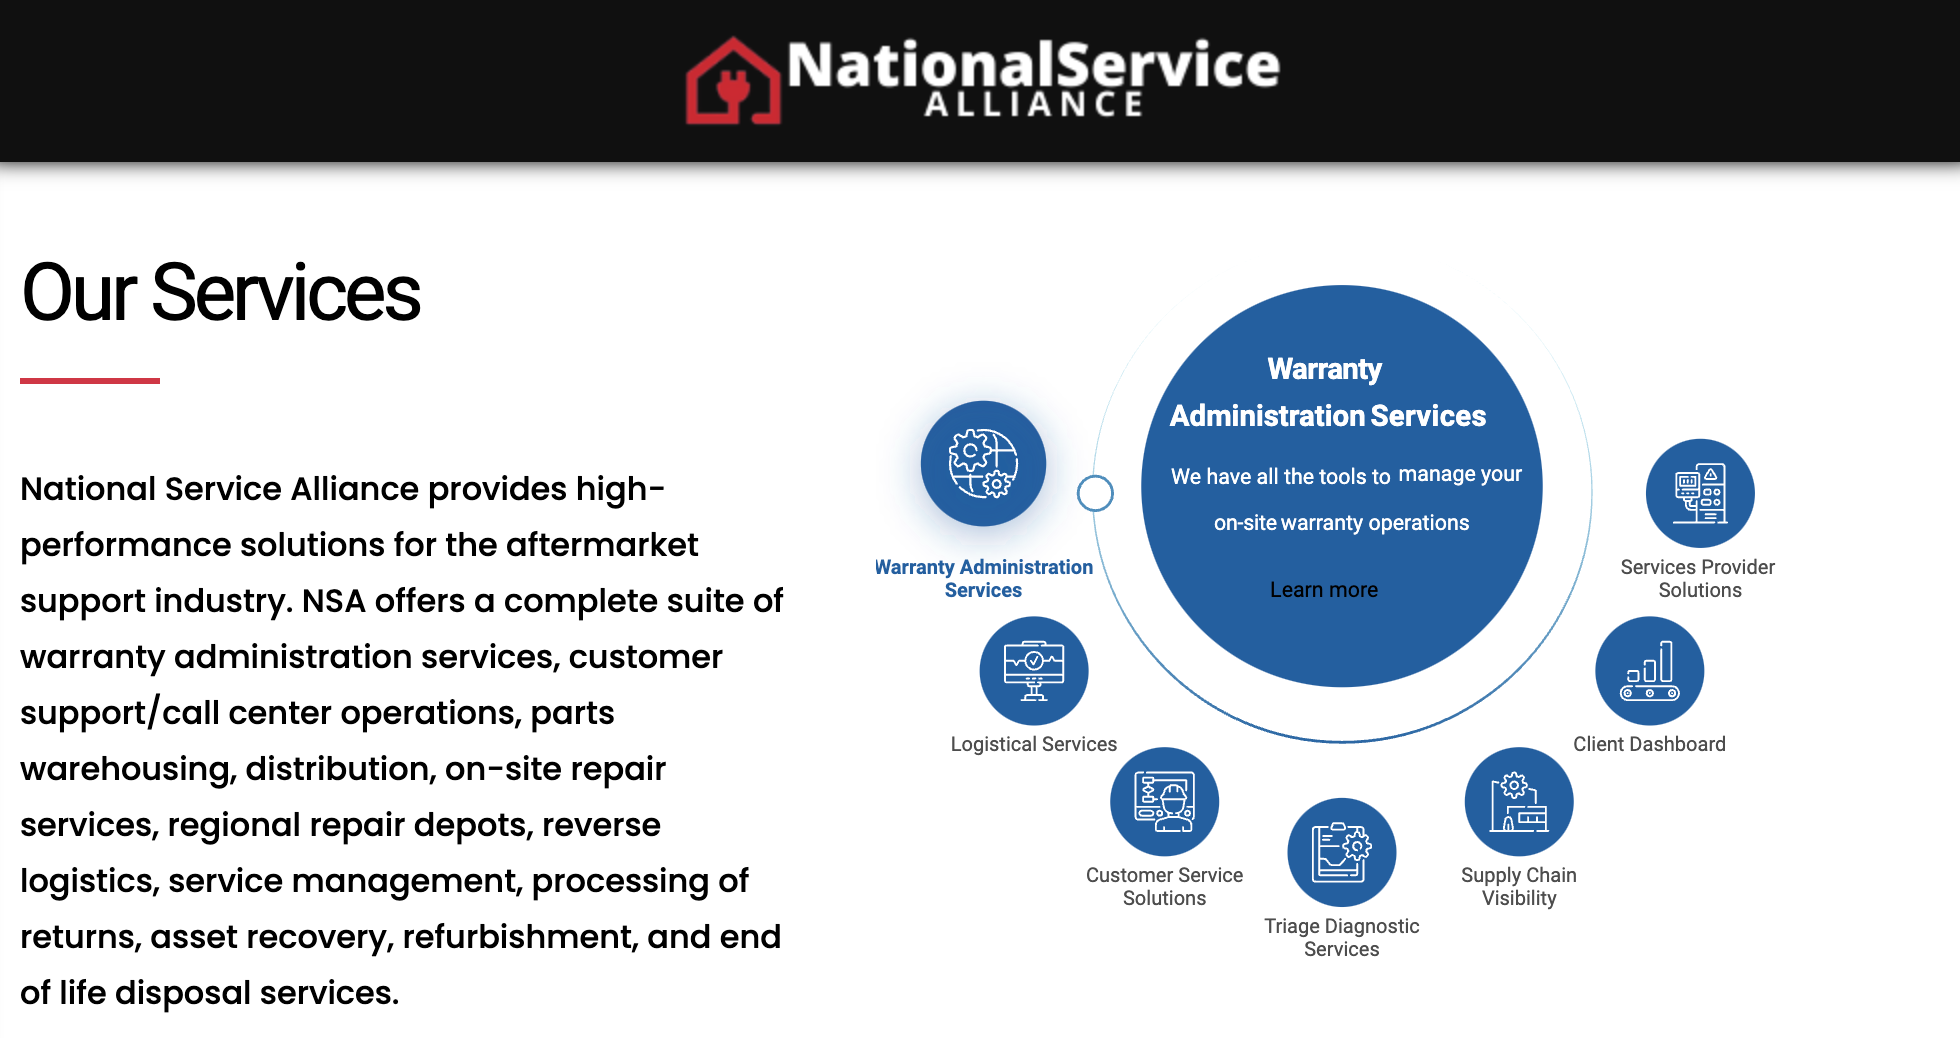 National Service Alliance (NSA) provides high-performance solutions for the aftermarket support industry.